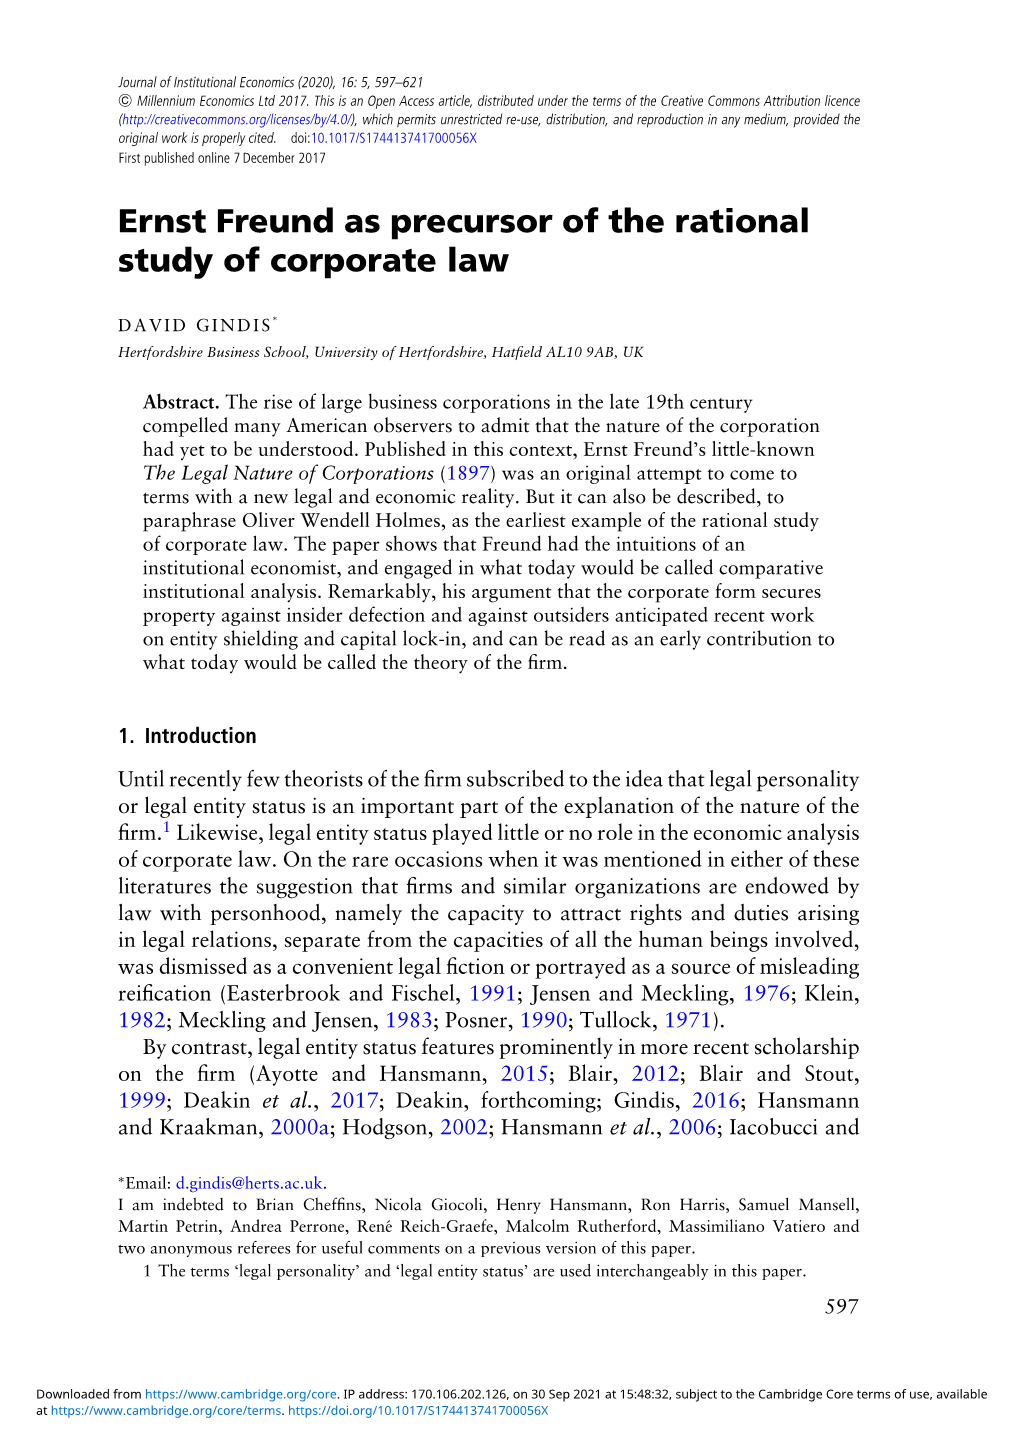 Ernst Freund As Precursor of the Rational Study of Corporate Law